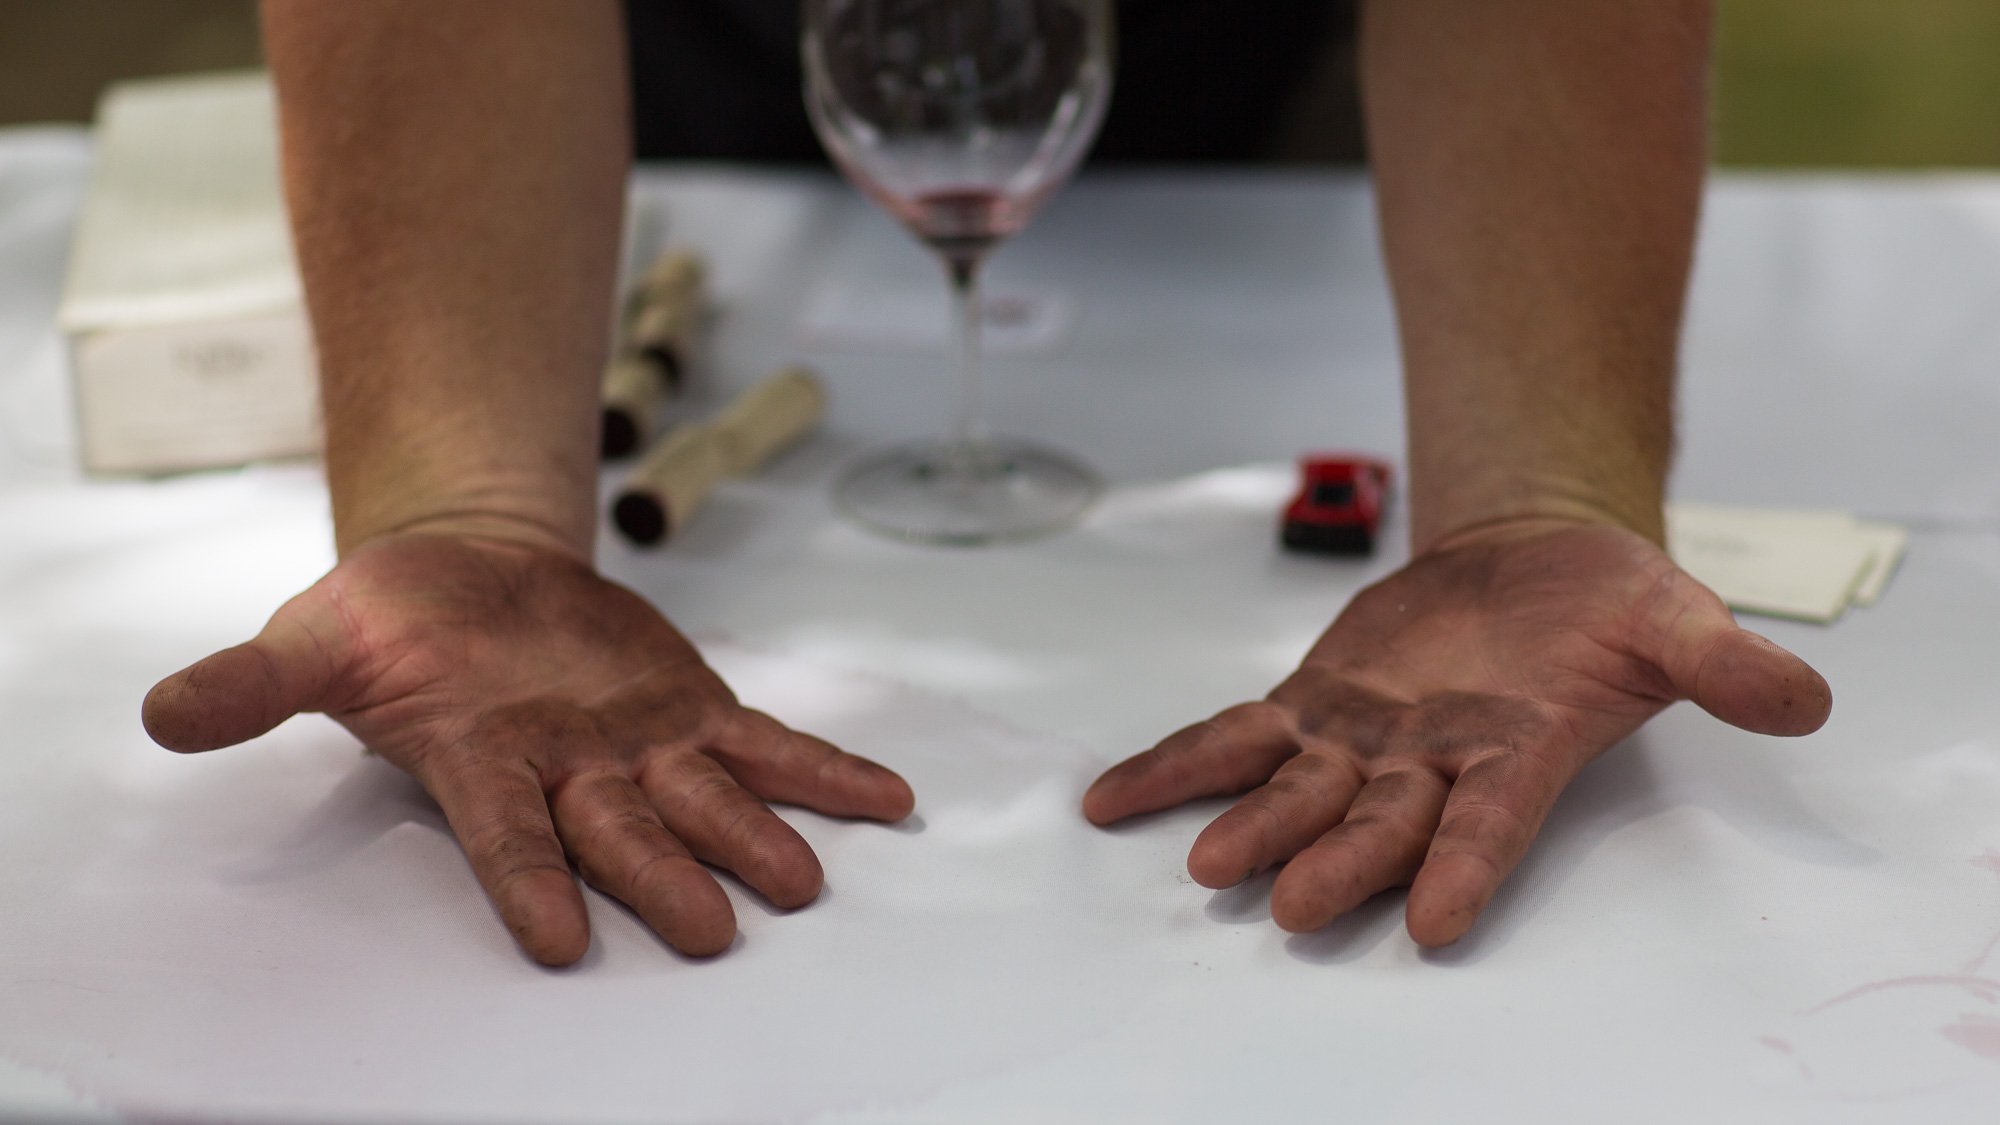 The hardworking hands of vintner and winemaker Mike Dunn, of Dunn Vineyards and Retro Cellars